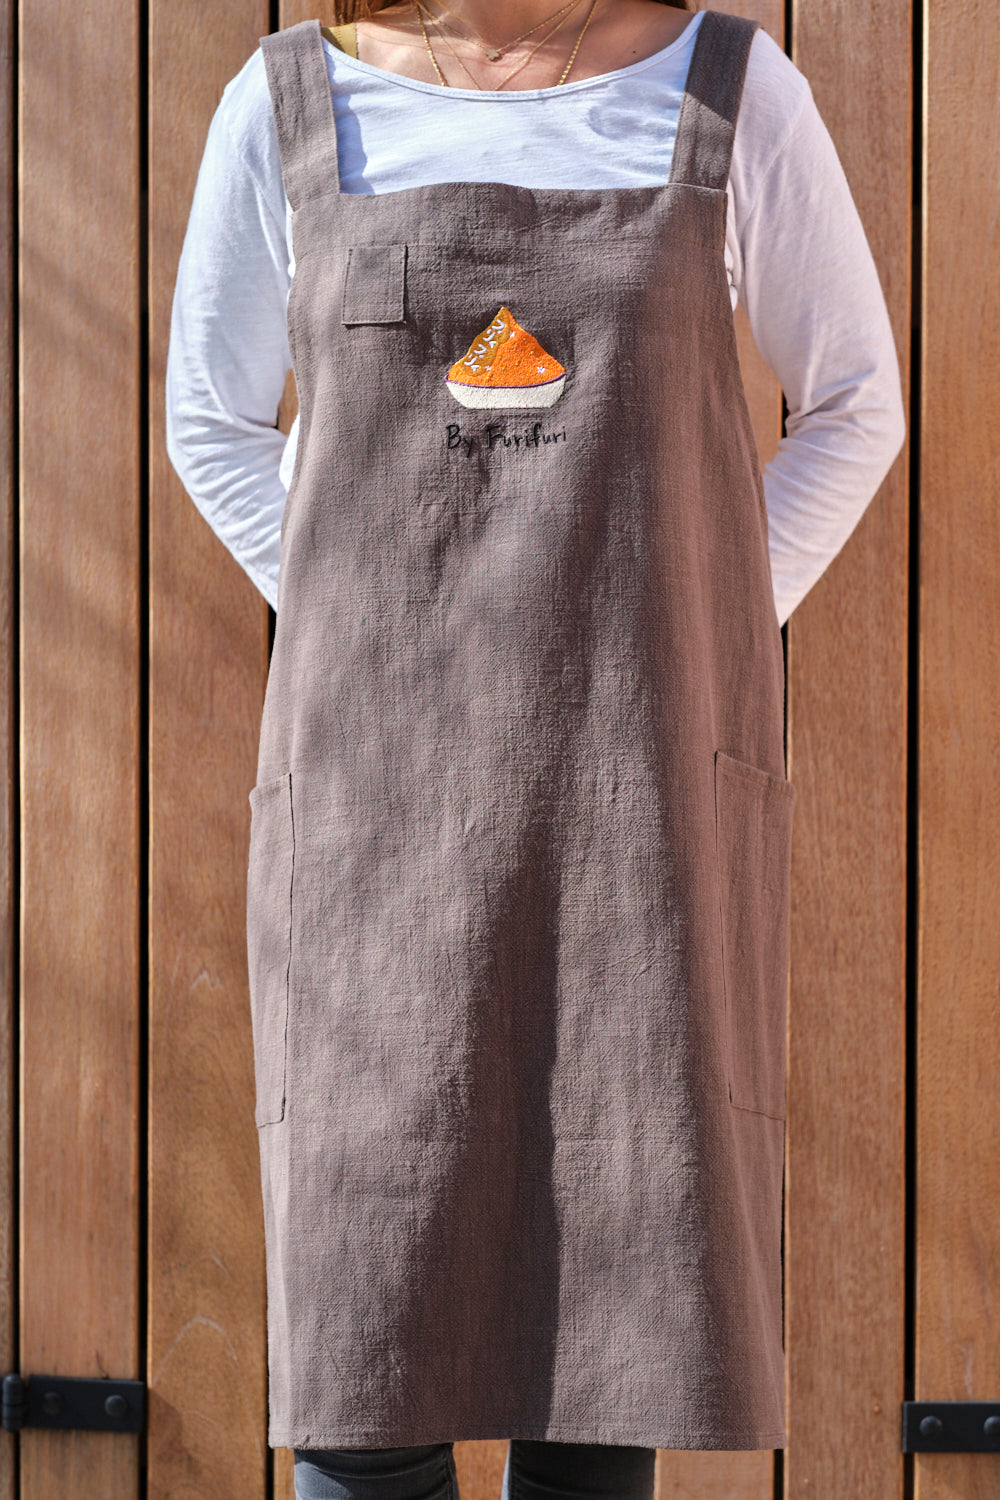 Copper Brown Japanese Apron